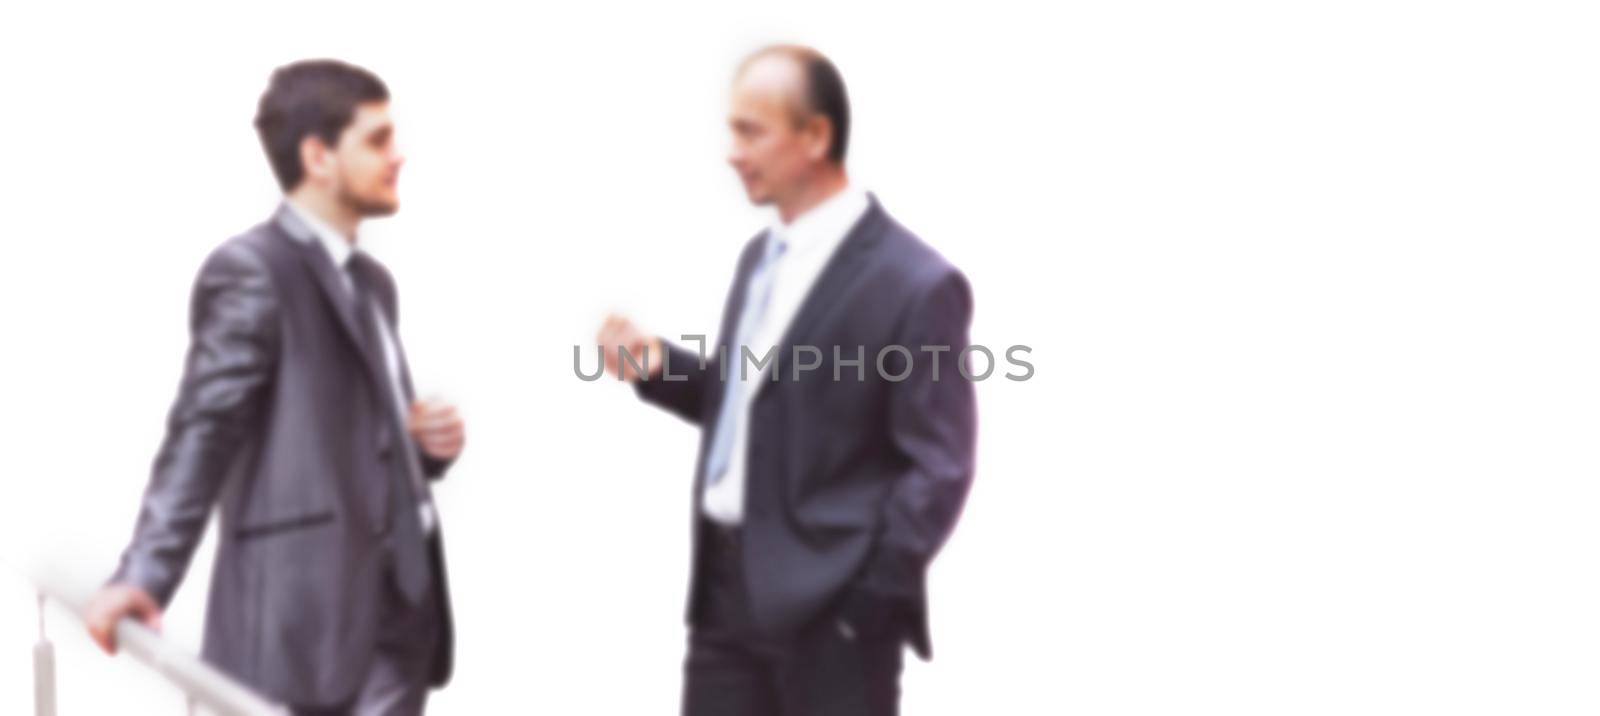 business colleagues discussing business issues. office weekdays. blurred image for the advertising text.